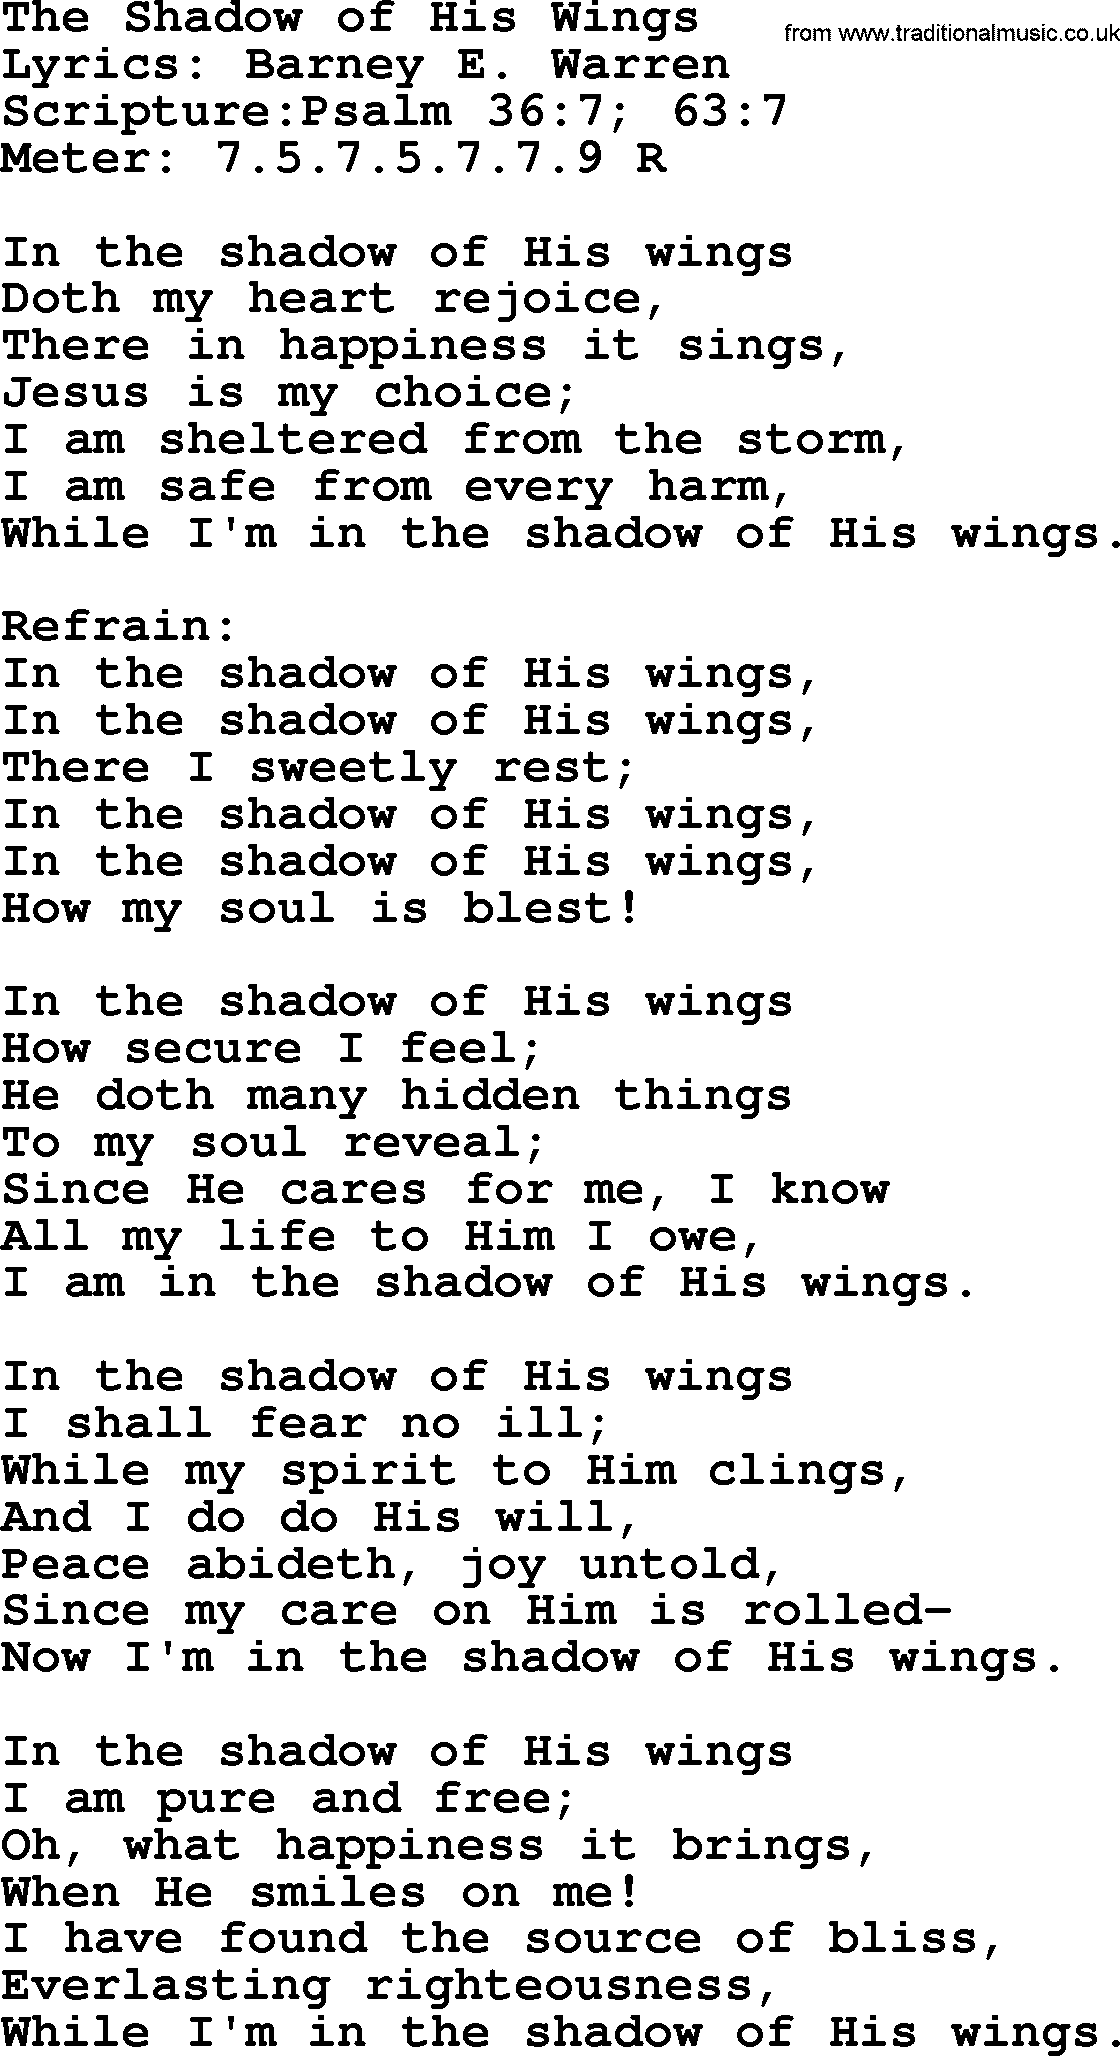 Hymns about  Angels, Hymn: The Shadow of His Wings, lyrics, sheet music, midi & Mp3 music with PDF